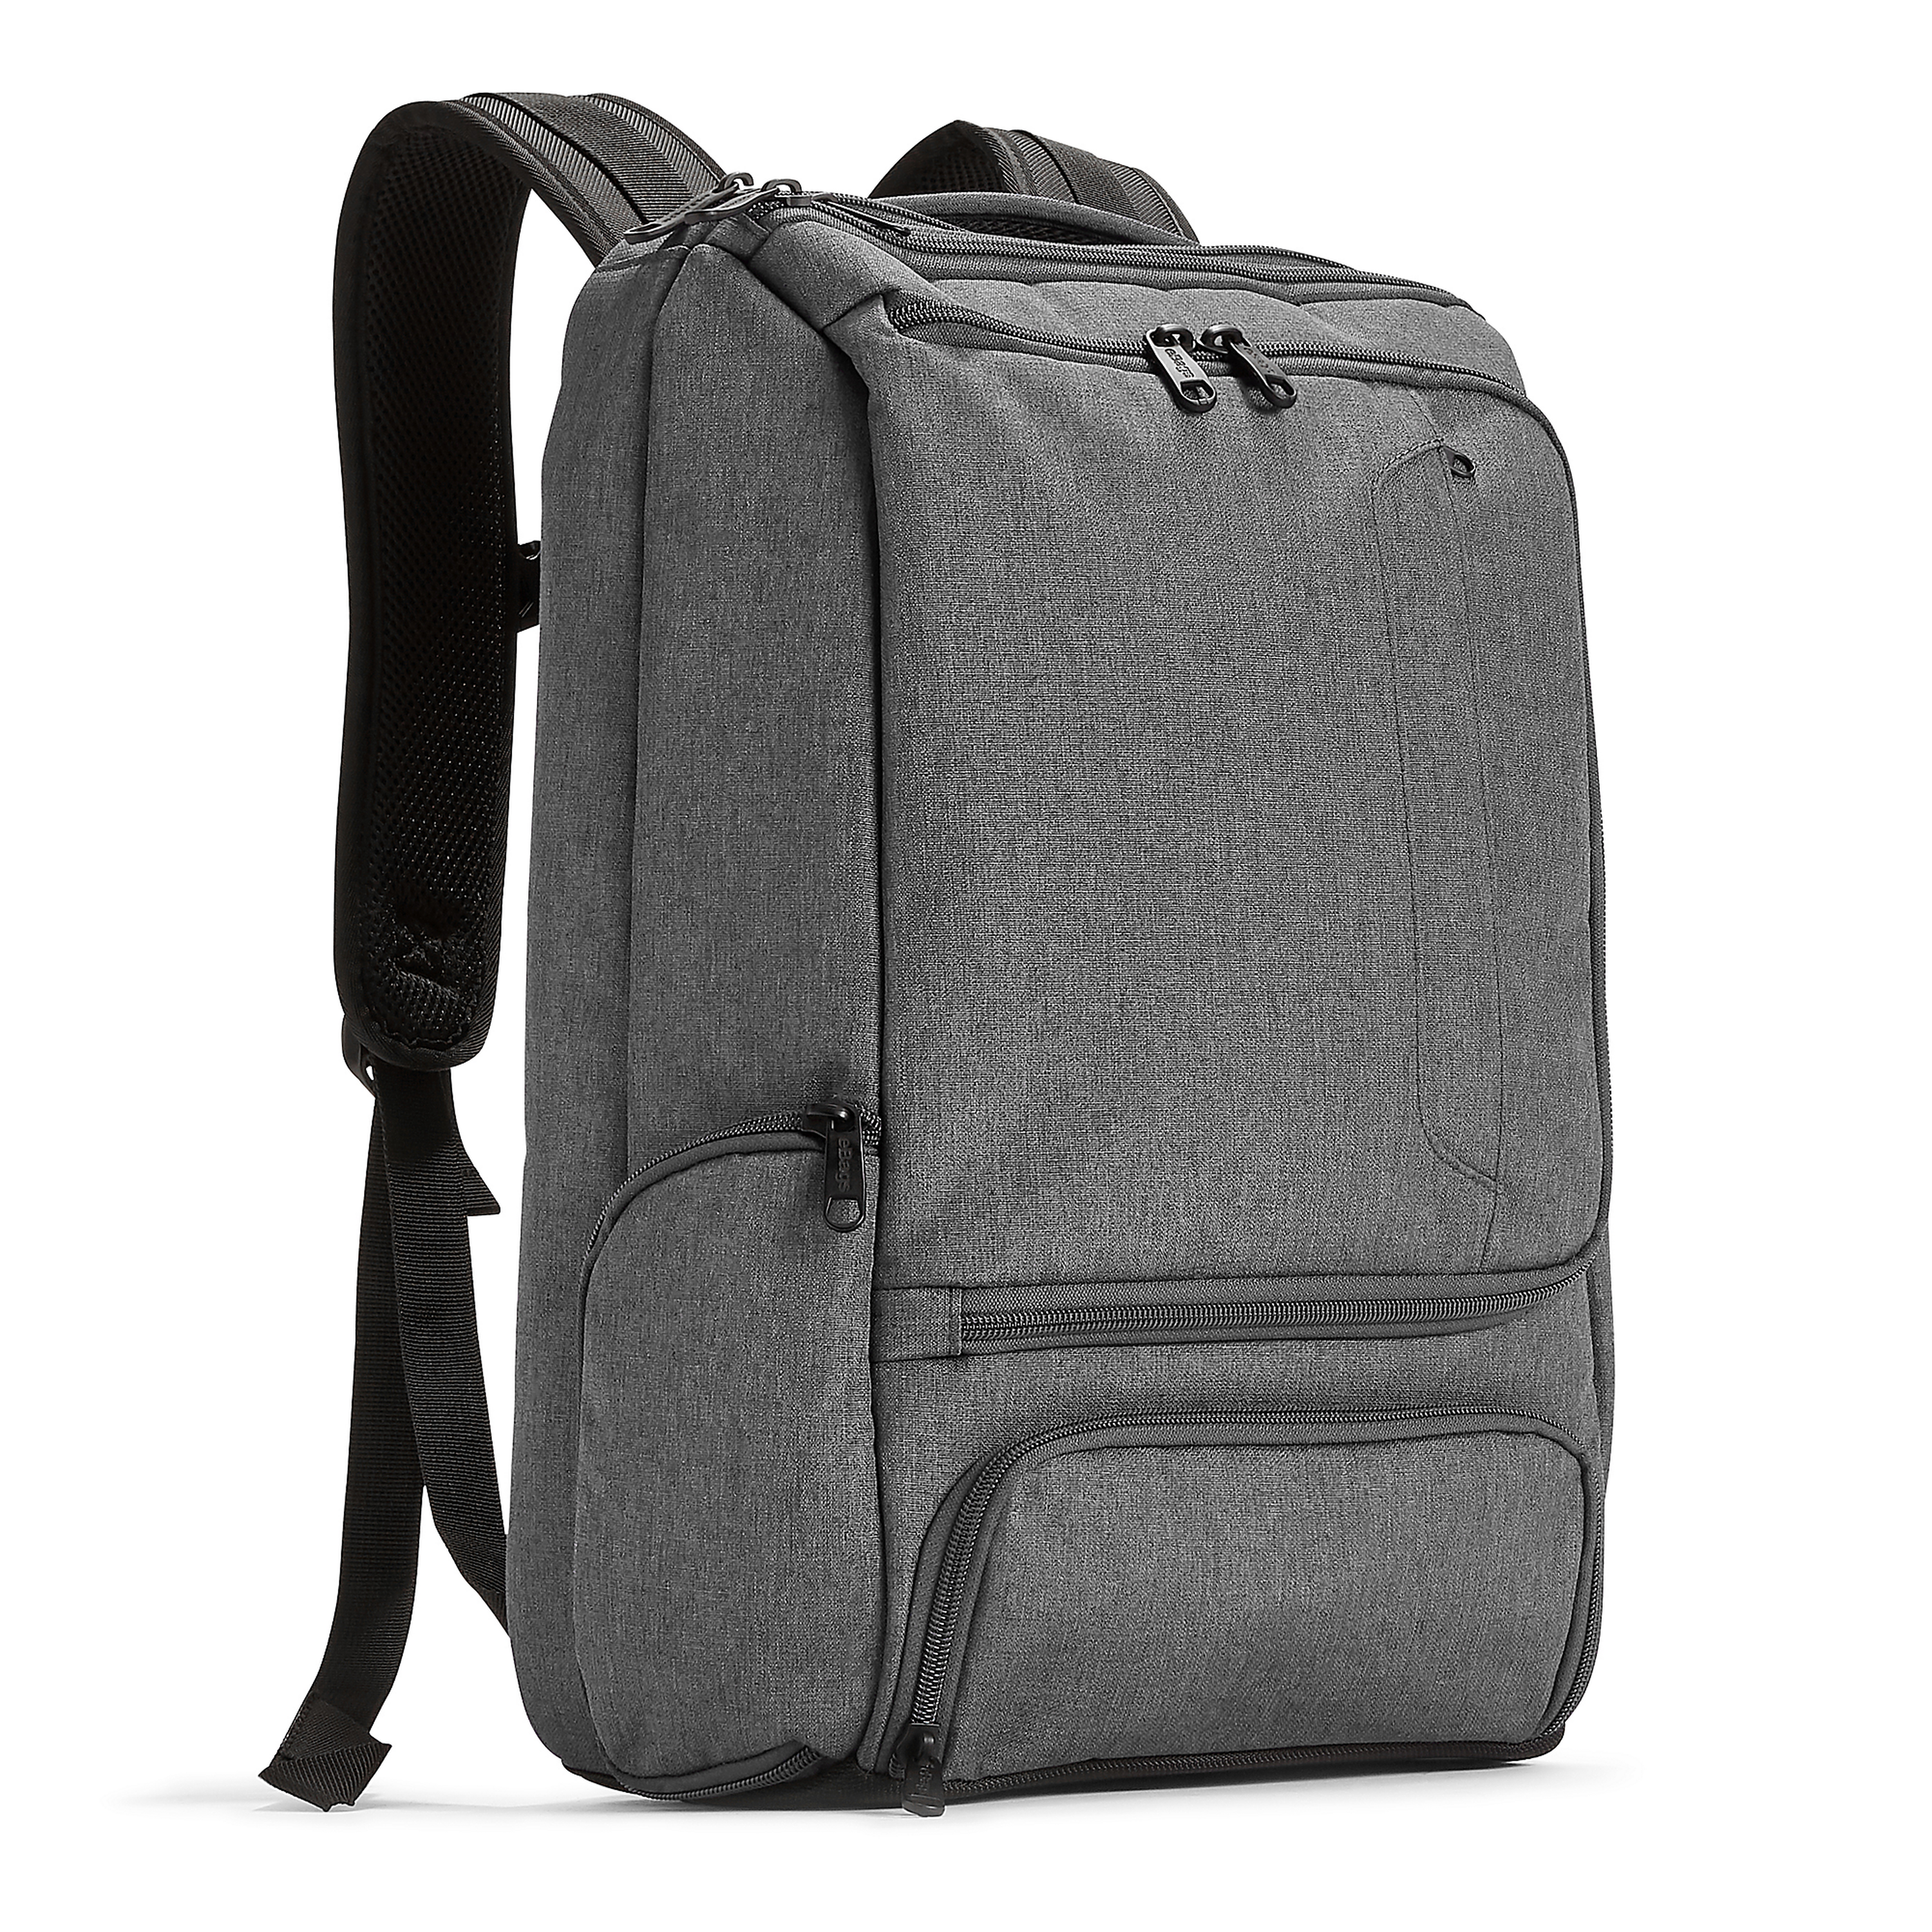 Backpack, Canvas Backpack, Laptop Backpack, Small Backpack, School